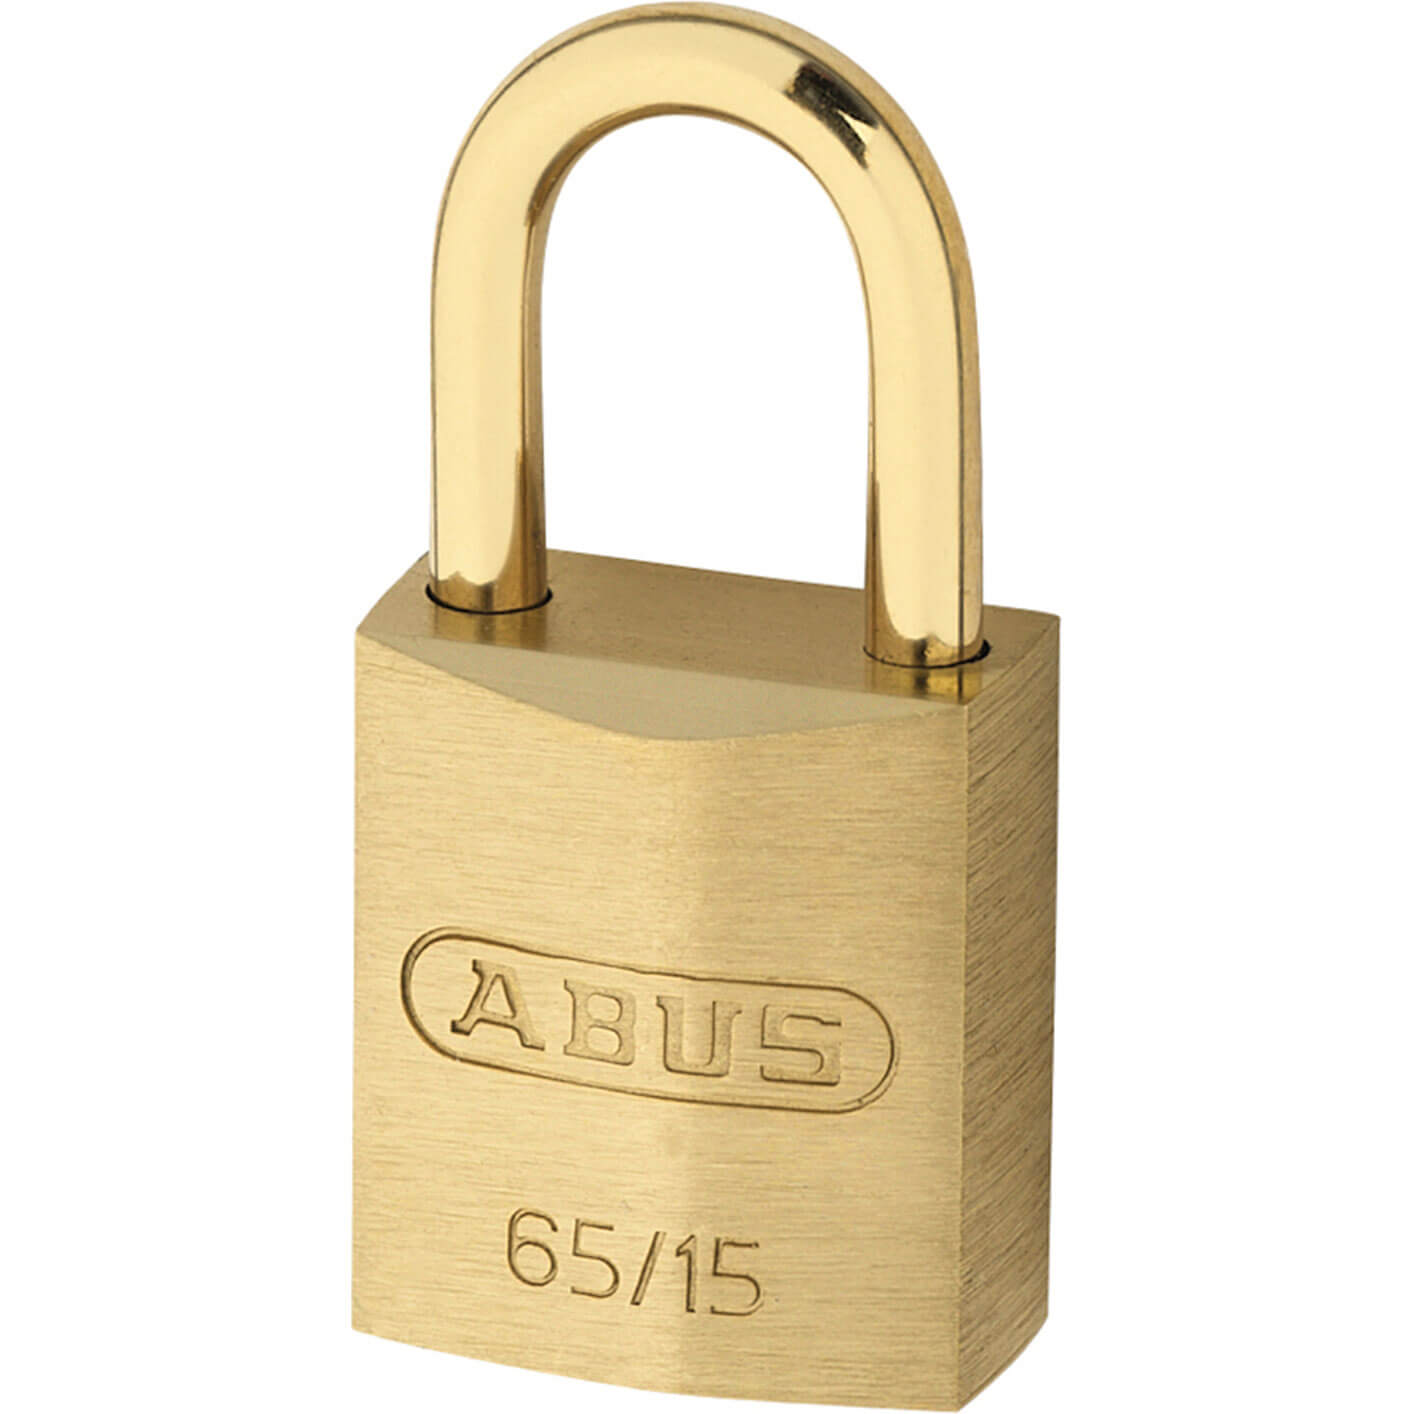 Image of Abus 65 Series Brass Padlock With Brass Shackle Keyed Alike 15mm Standard 151